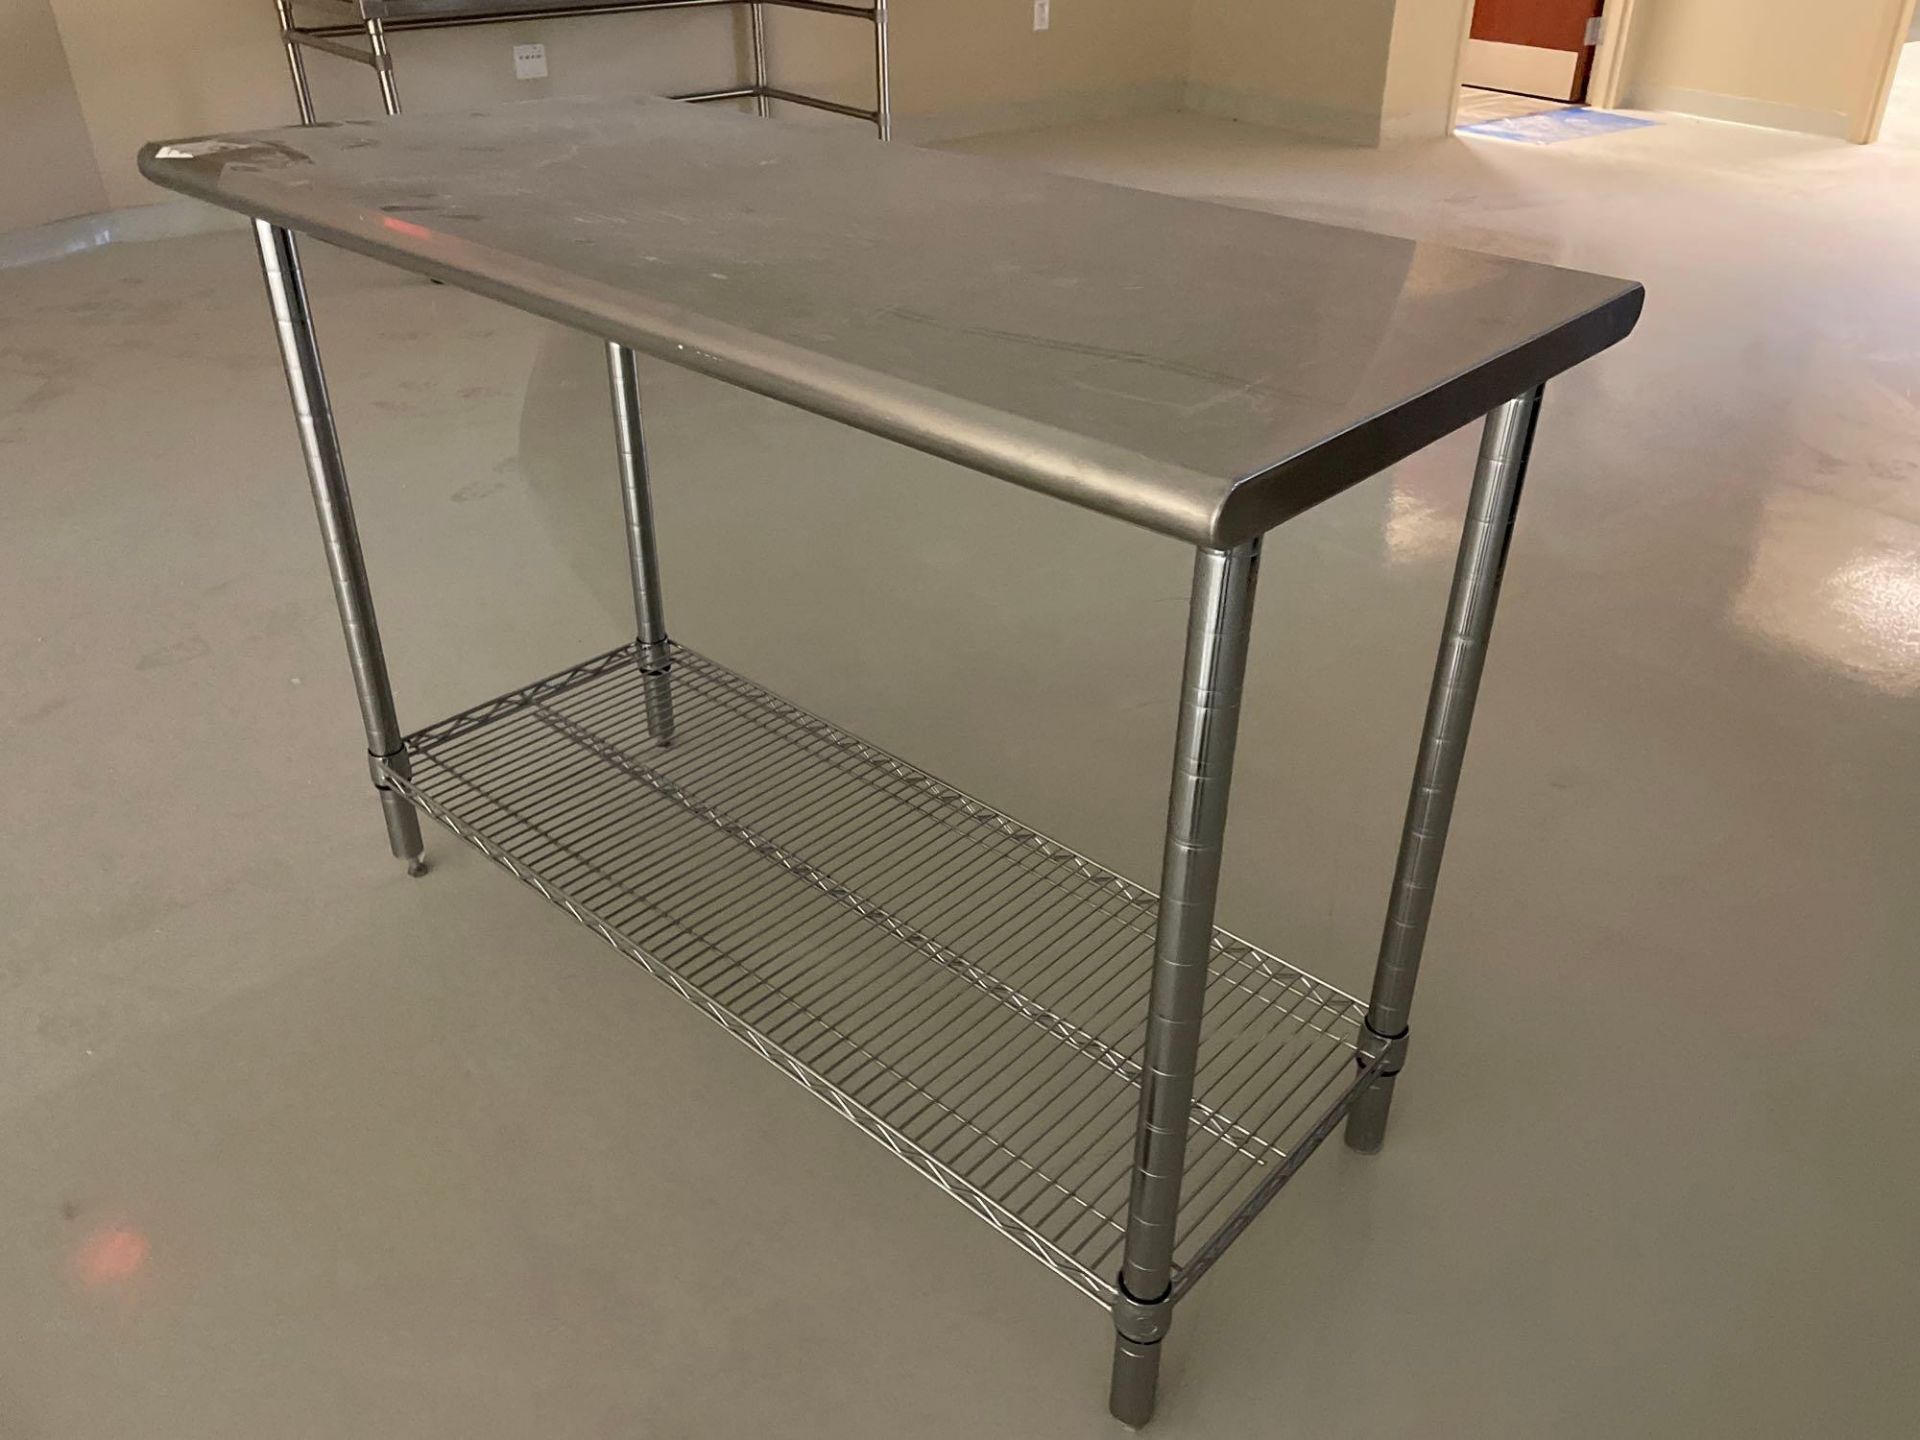 Stainless Table w/ Wire Legs and Undershelf - Image 2 of 4